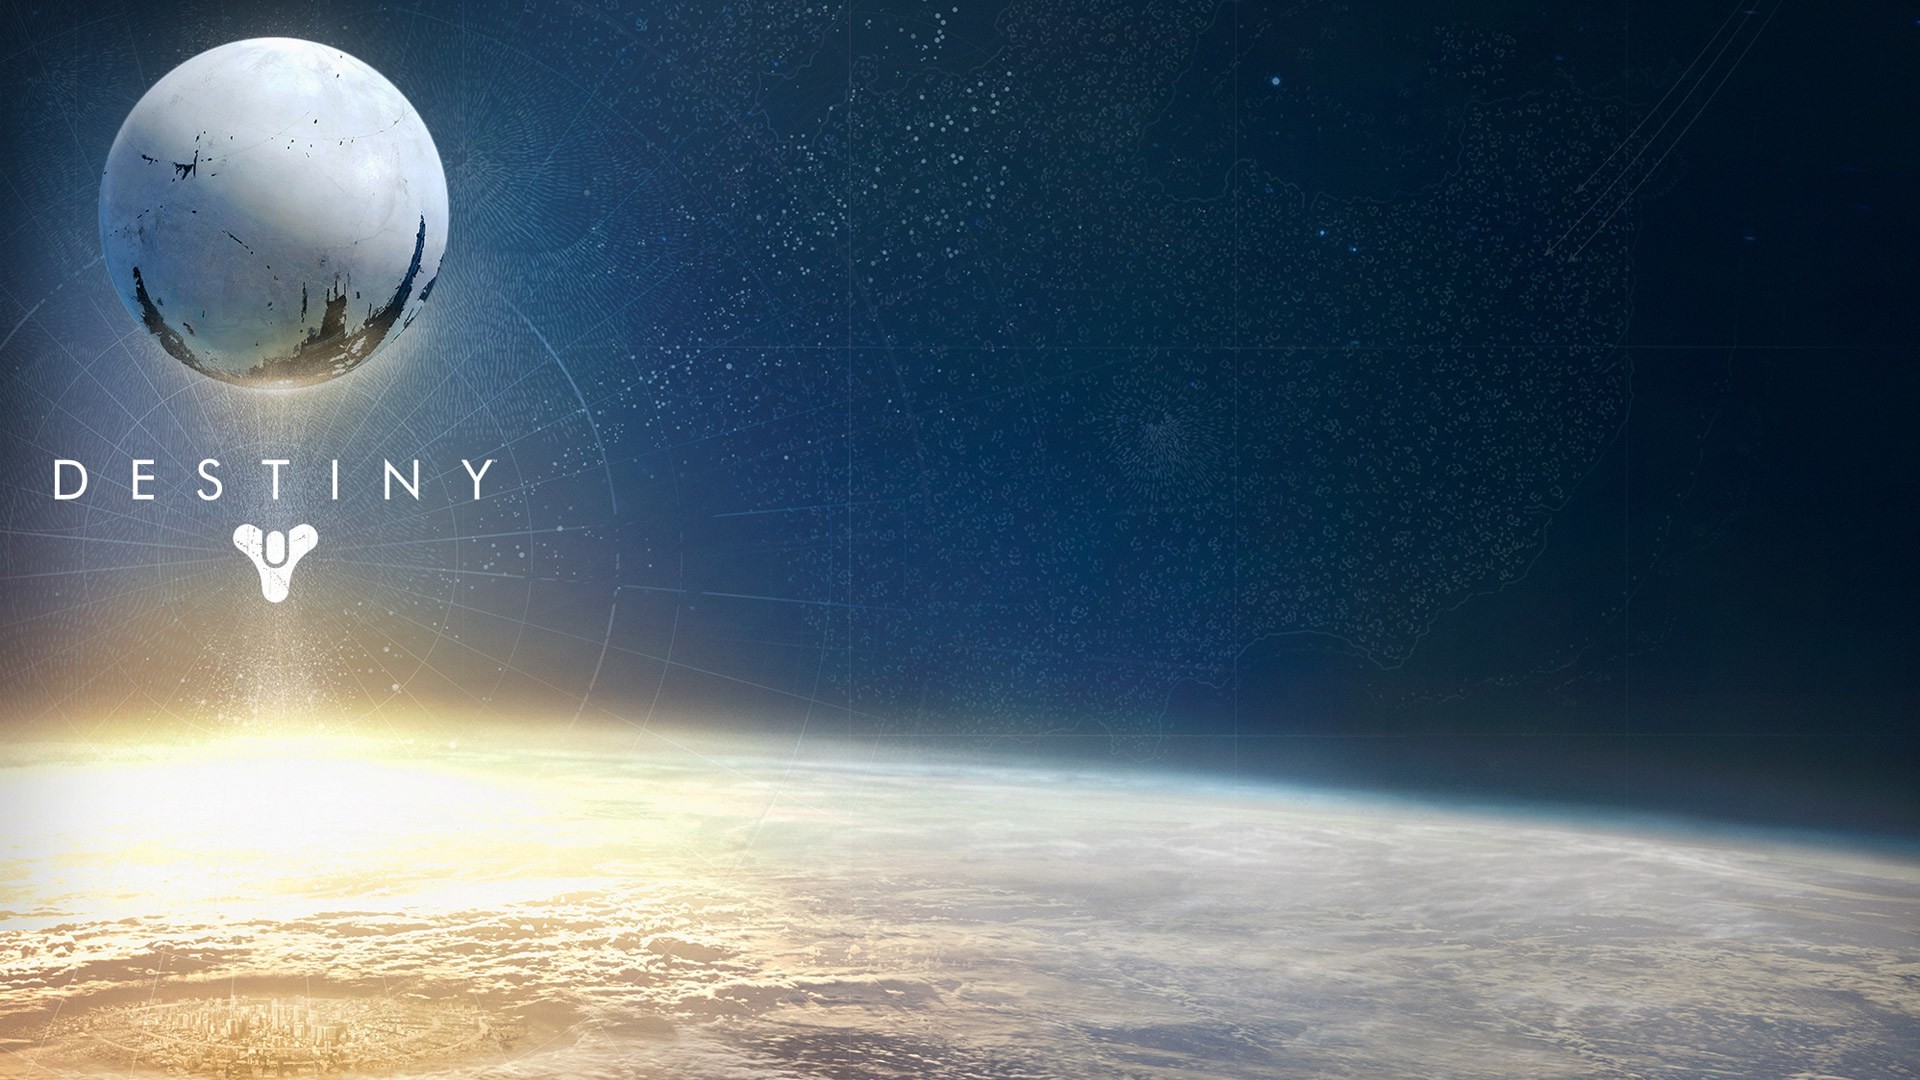 1920x1080 Today i've collected the Full HD Destiny Wallpapers for your desktop and  Mac. You can also use these Wallpapers for your smartphones.